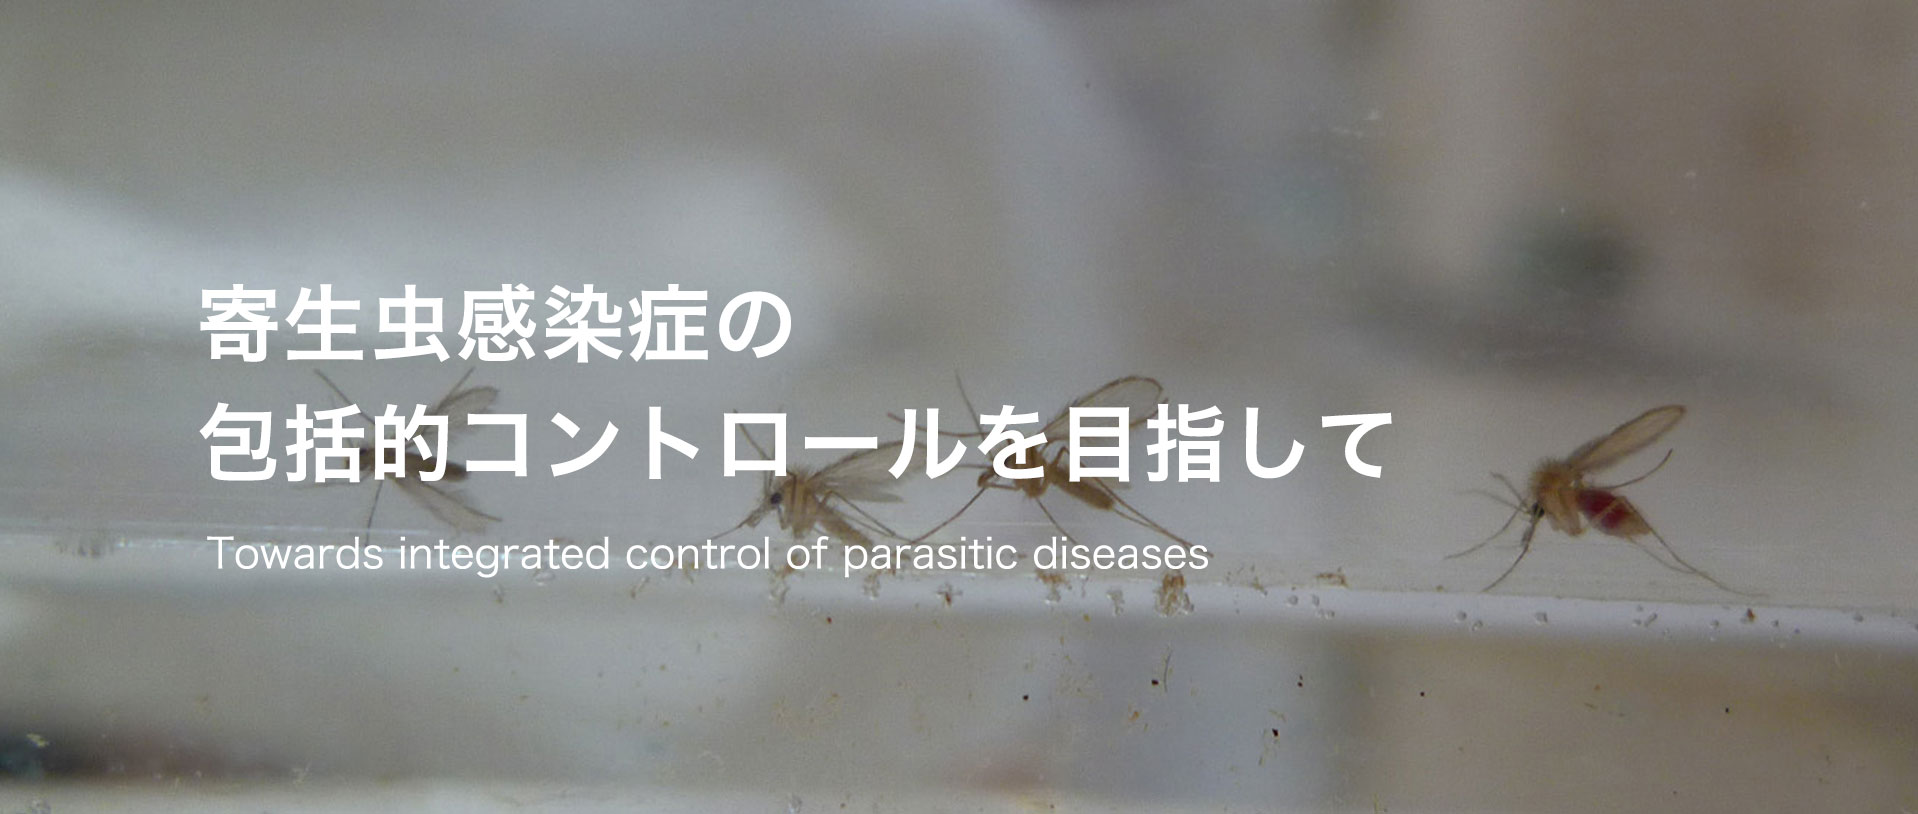 Towards integrated control of parasitic diseases